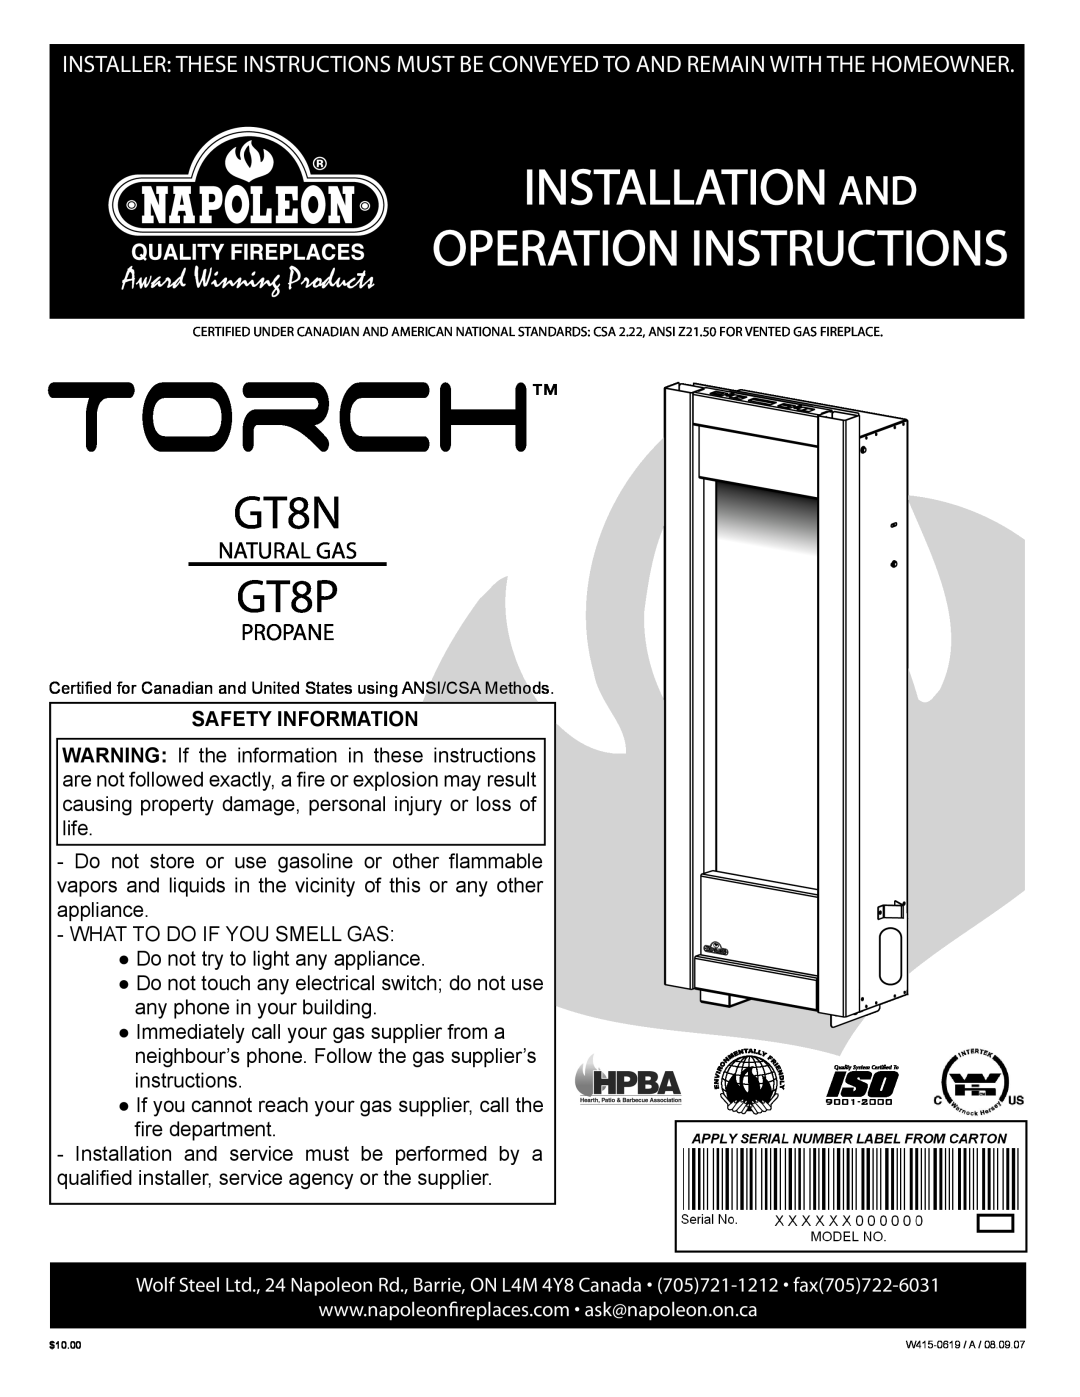 Napoleon Fireplaces GT8N manual Installation And, Operation Instructions, GT8P, Natural Gas, Propane, Safety Information 